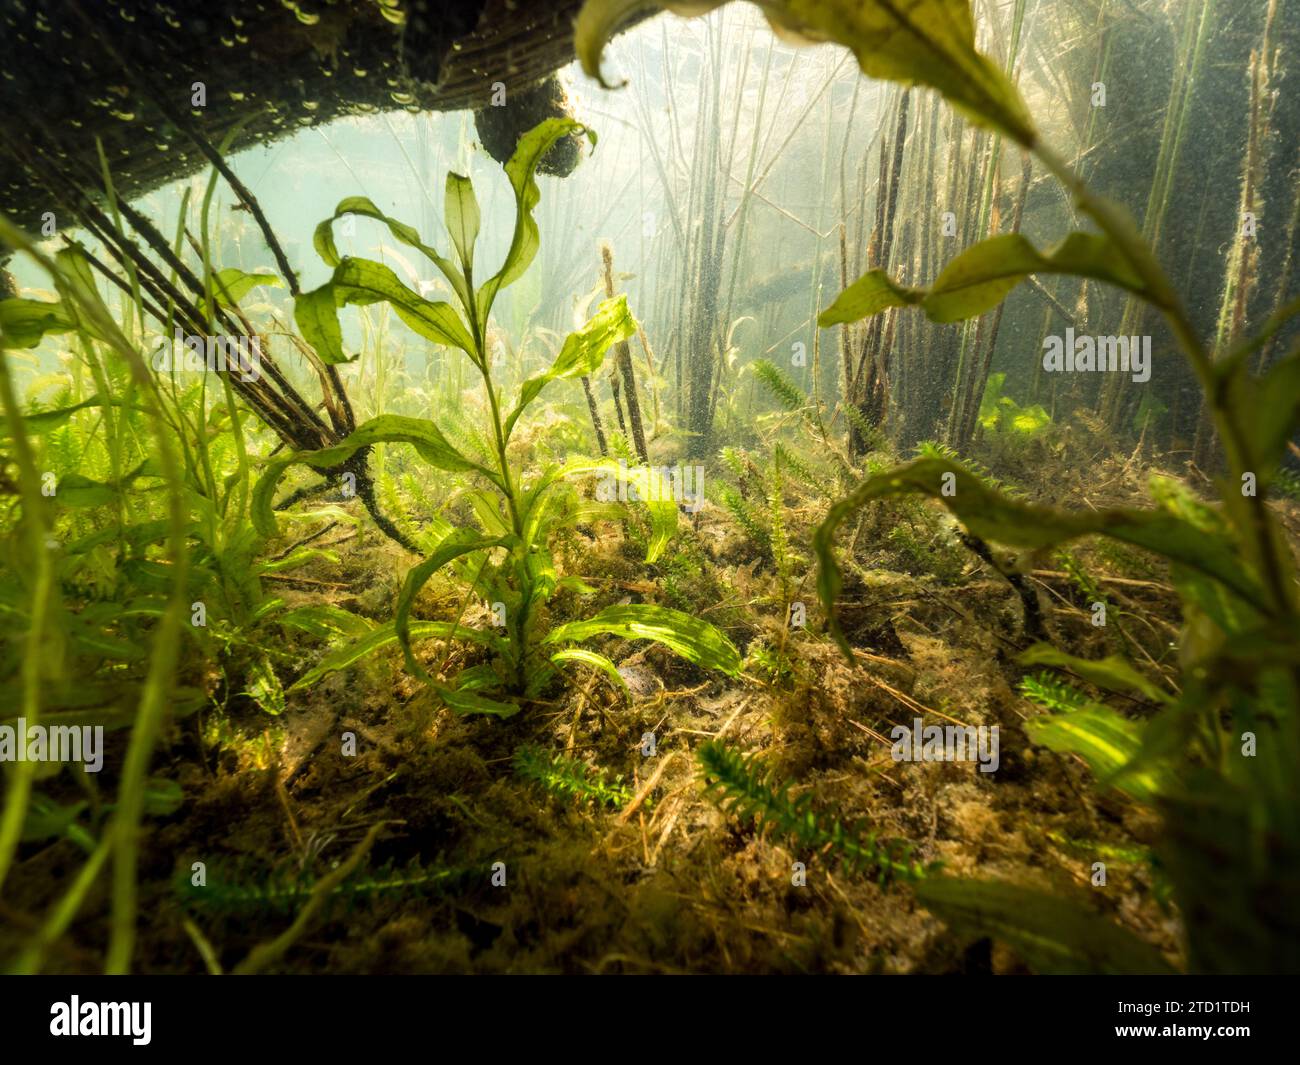 Aquatic plants in shallow water Stock Photo